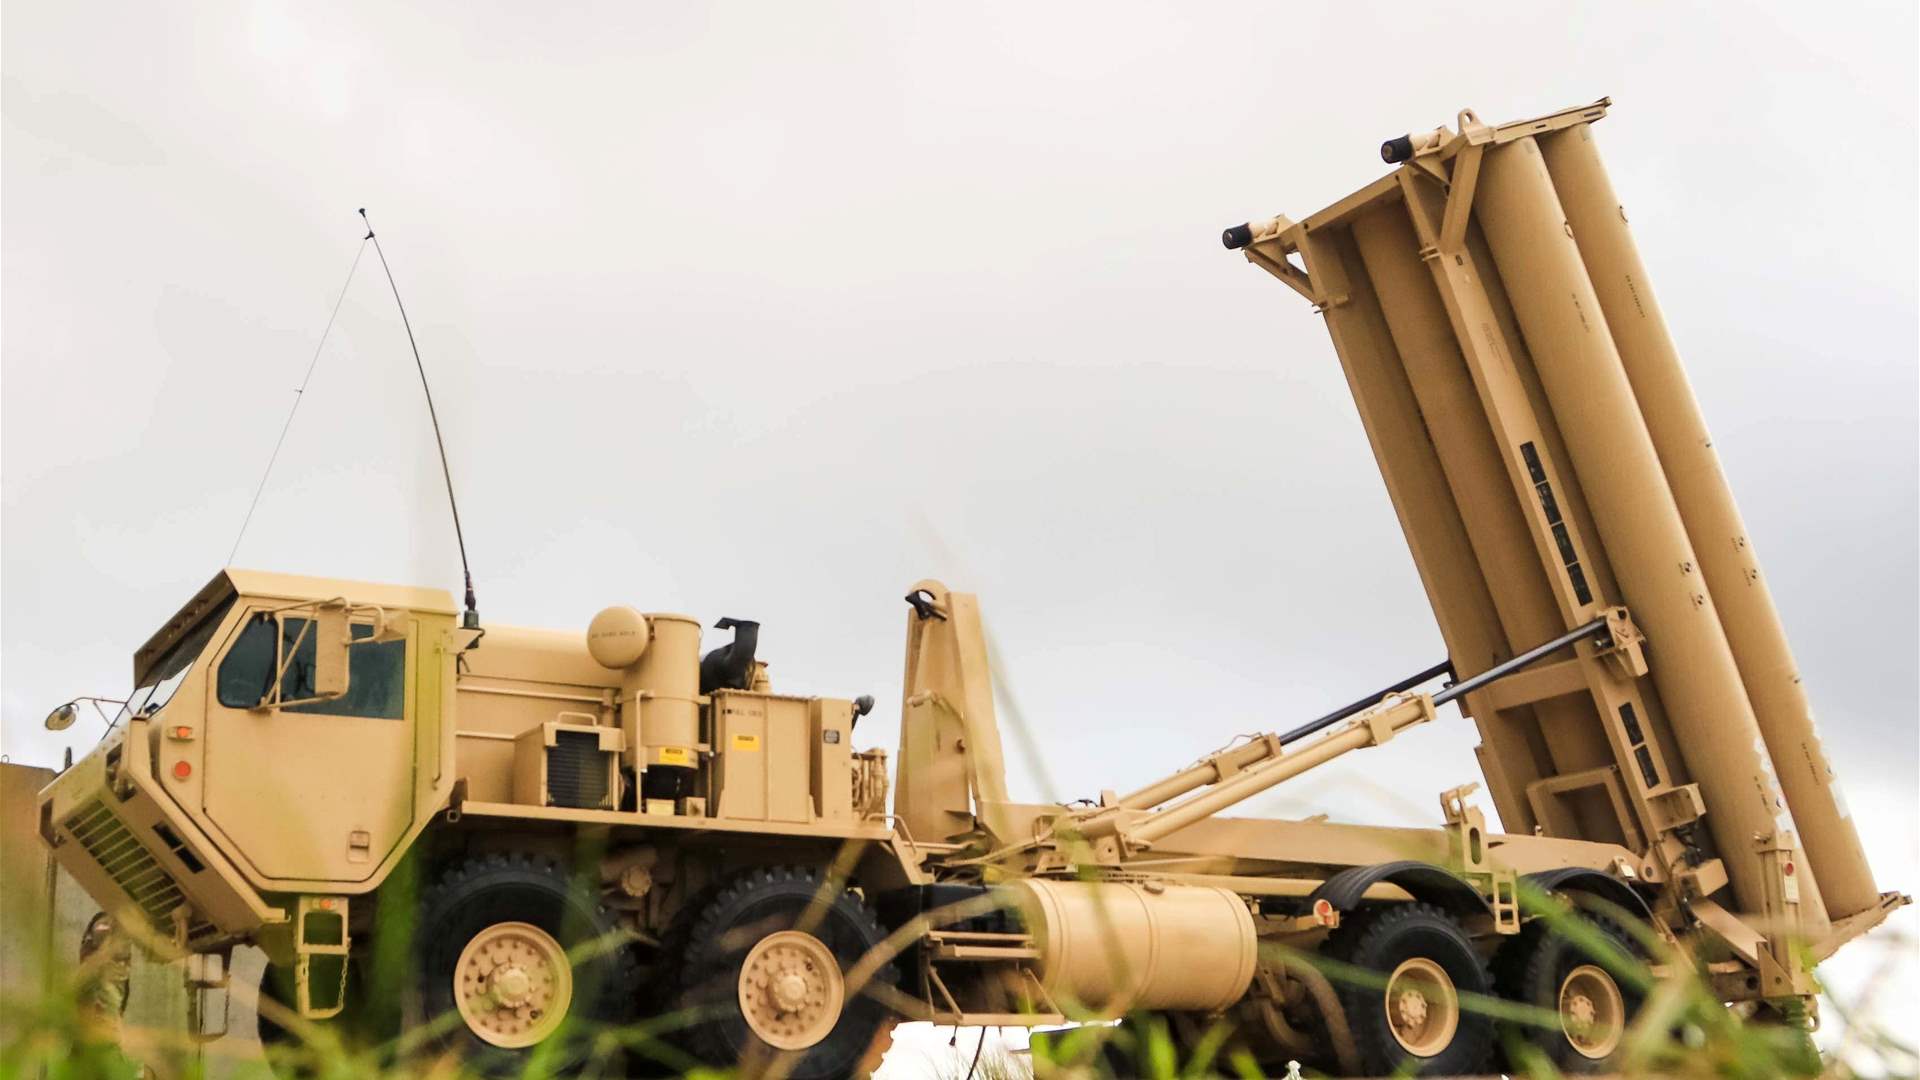 Enhancing US military capabilities in Middle East: The THAAD system